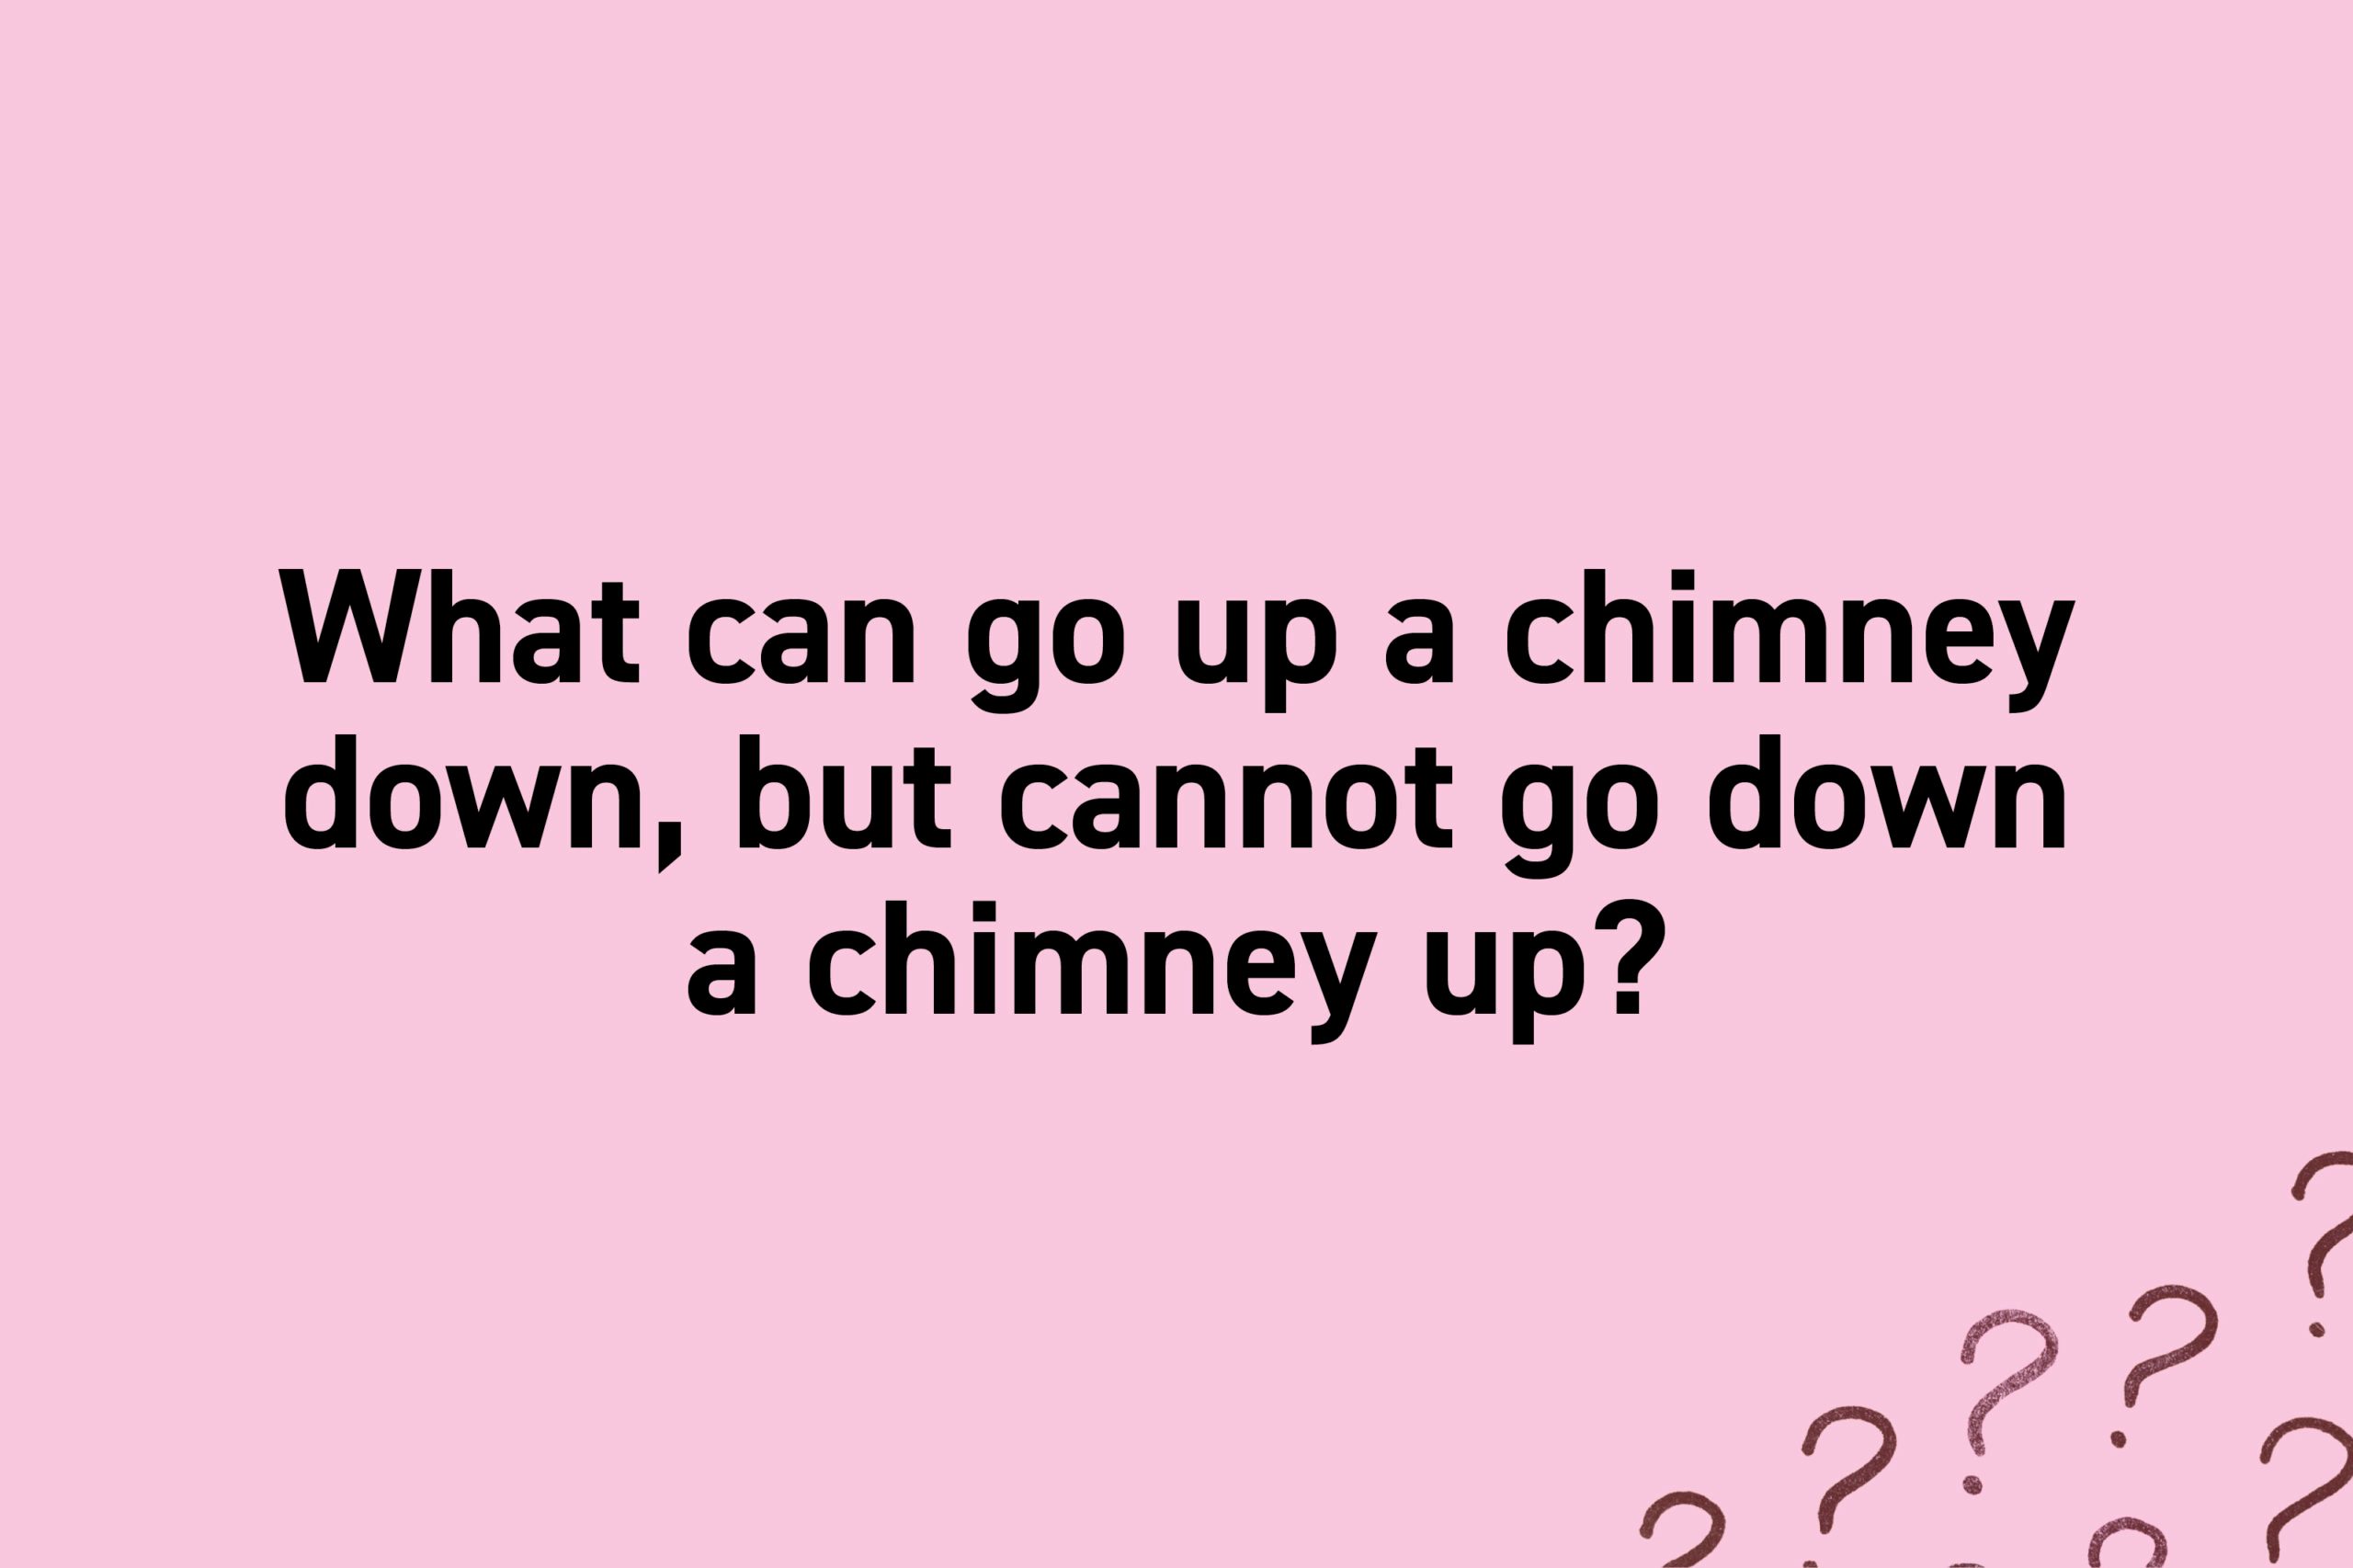 What can go up a chimney down, but cannot go down a chimney up?